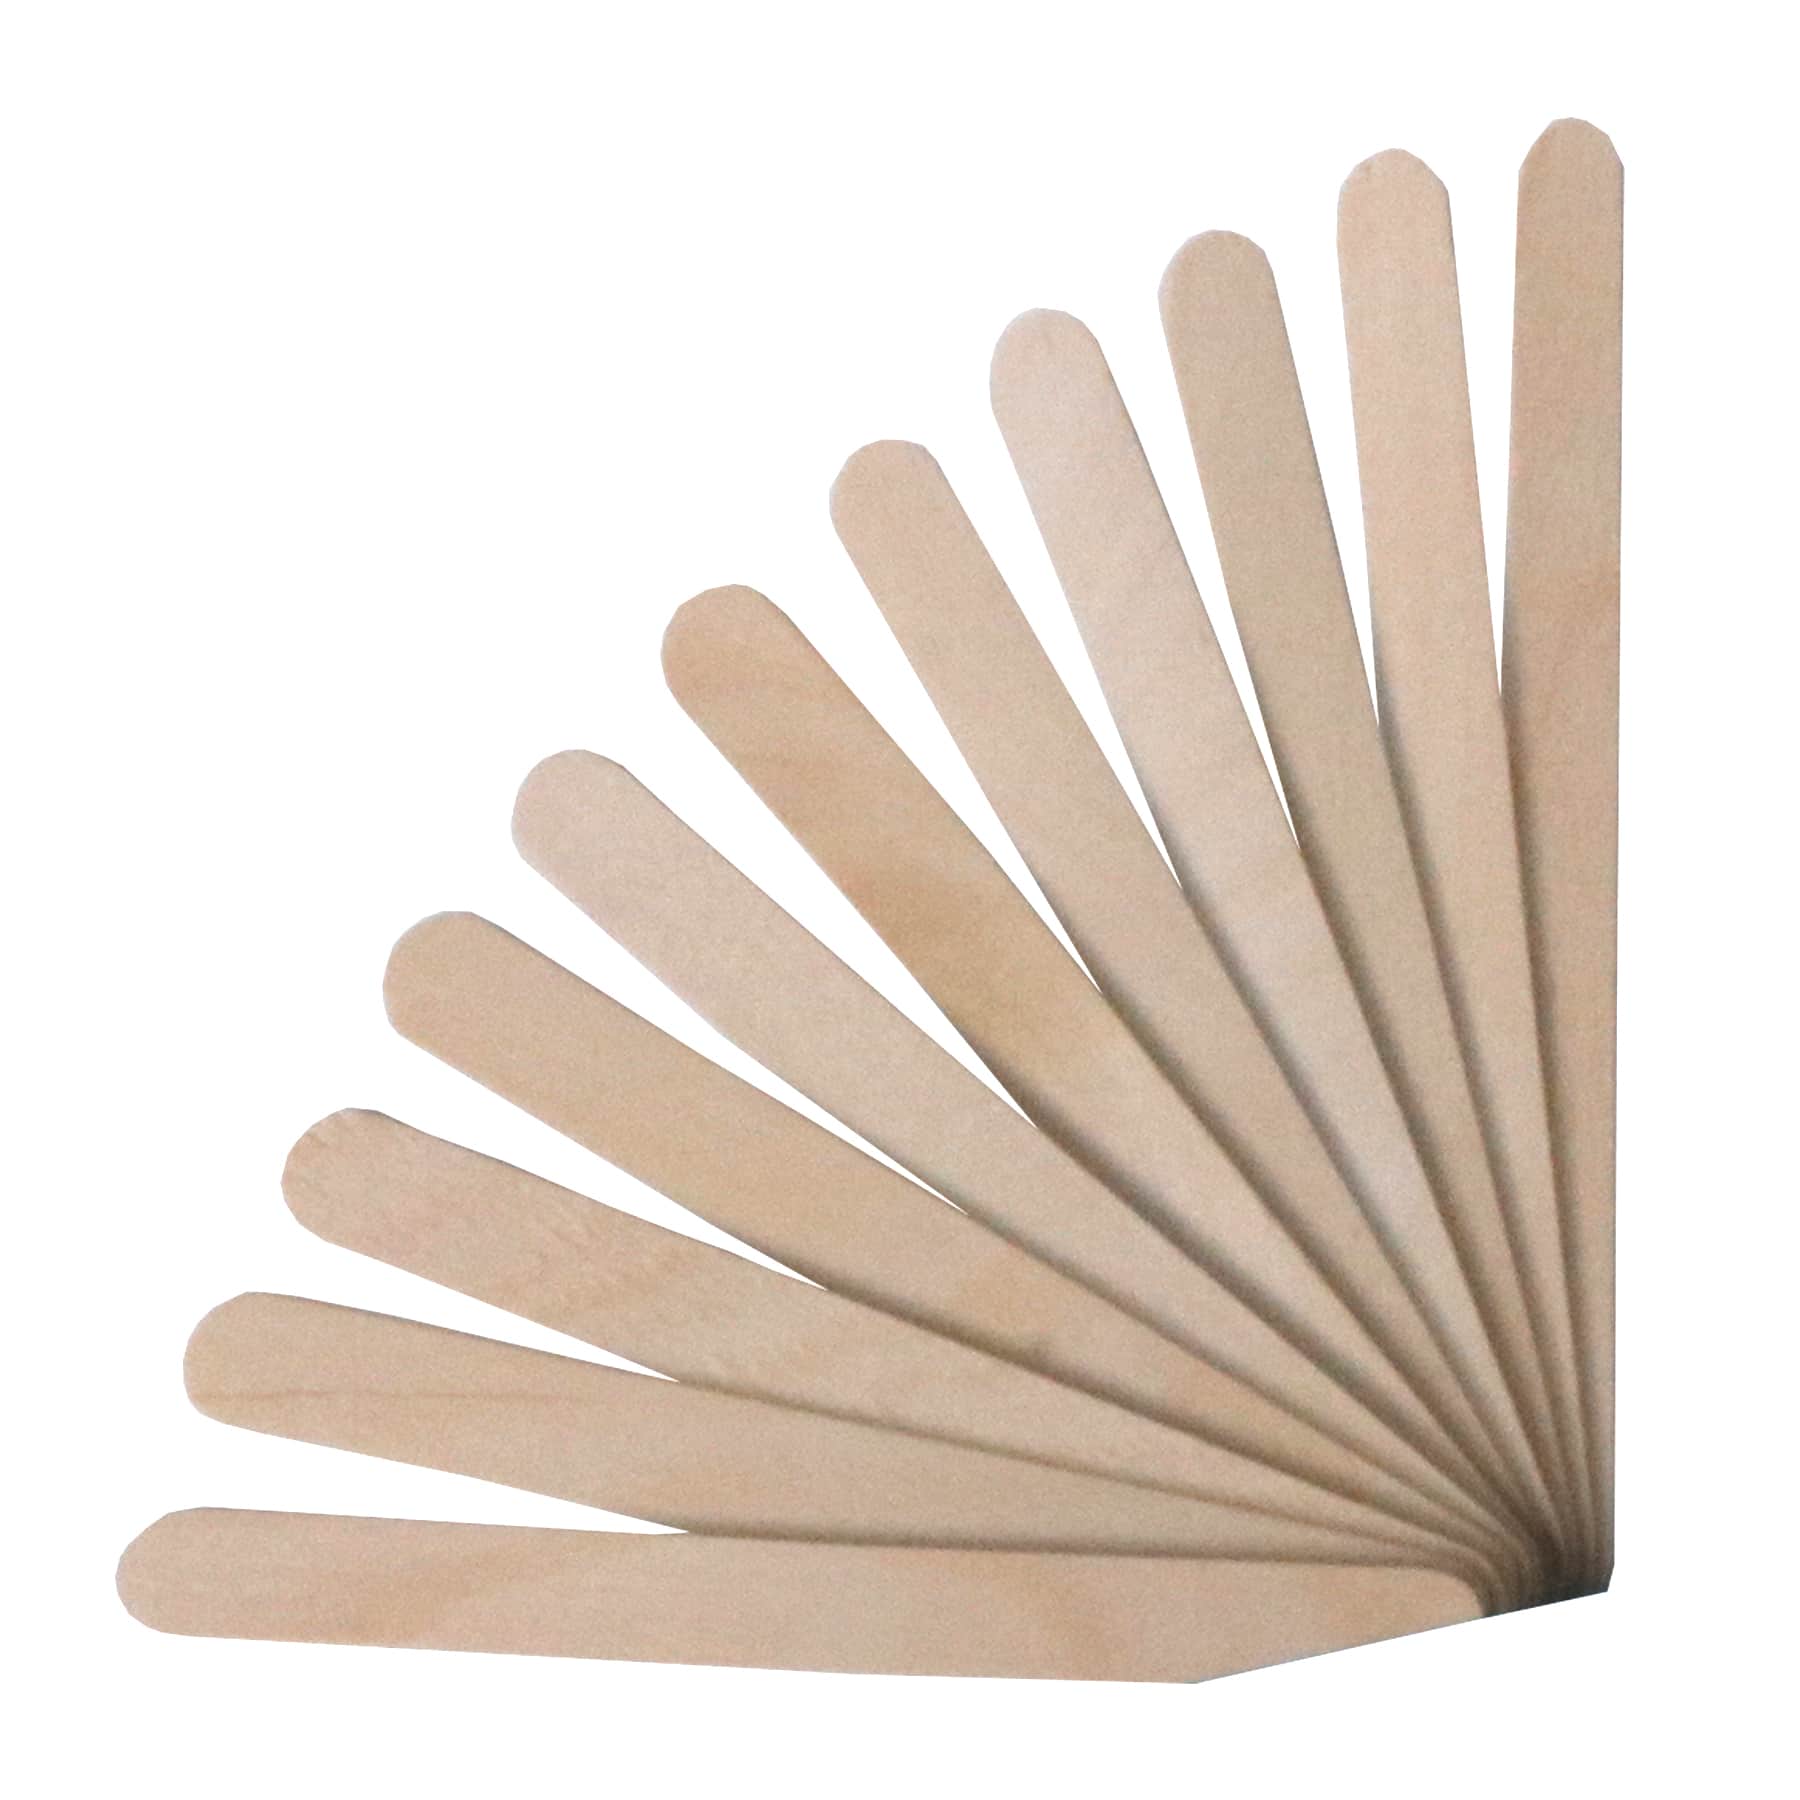 1000 Pack Popsicle Sticks for Crafts,Unfinished Natural Wood Wavy Popsicle Craft Sticks for Craft Sticks, Ice Cream Sticks, Paint Sticks, Tongue